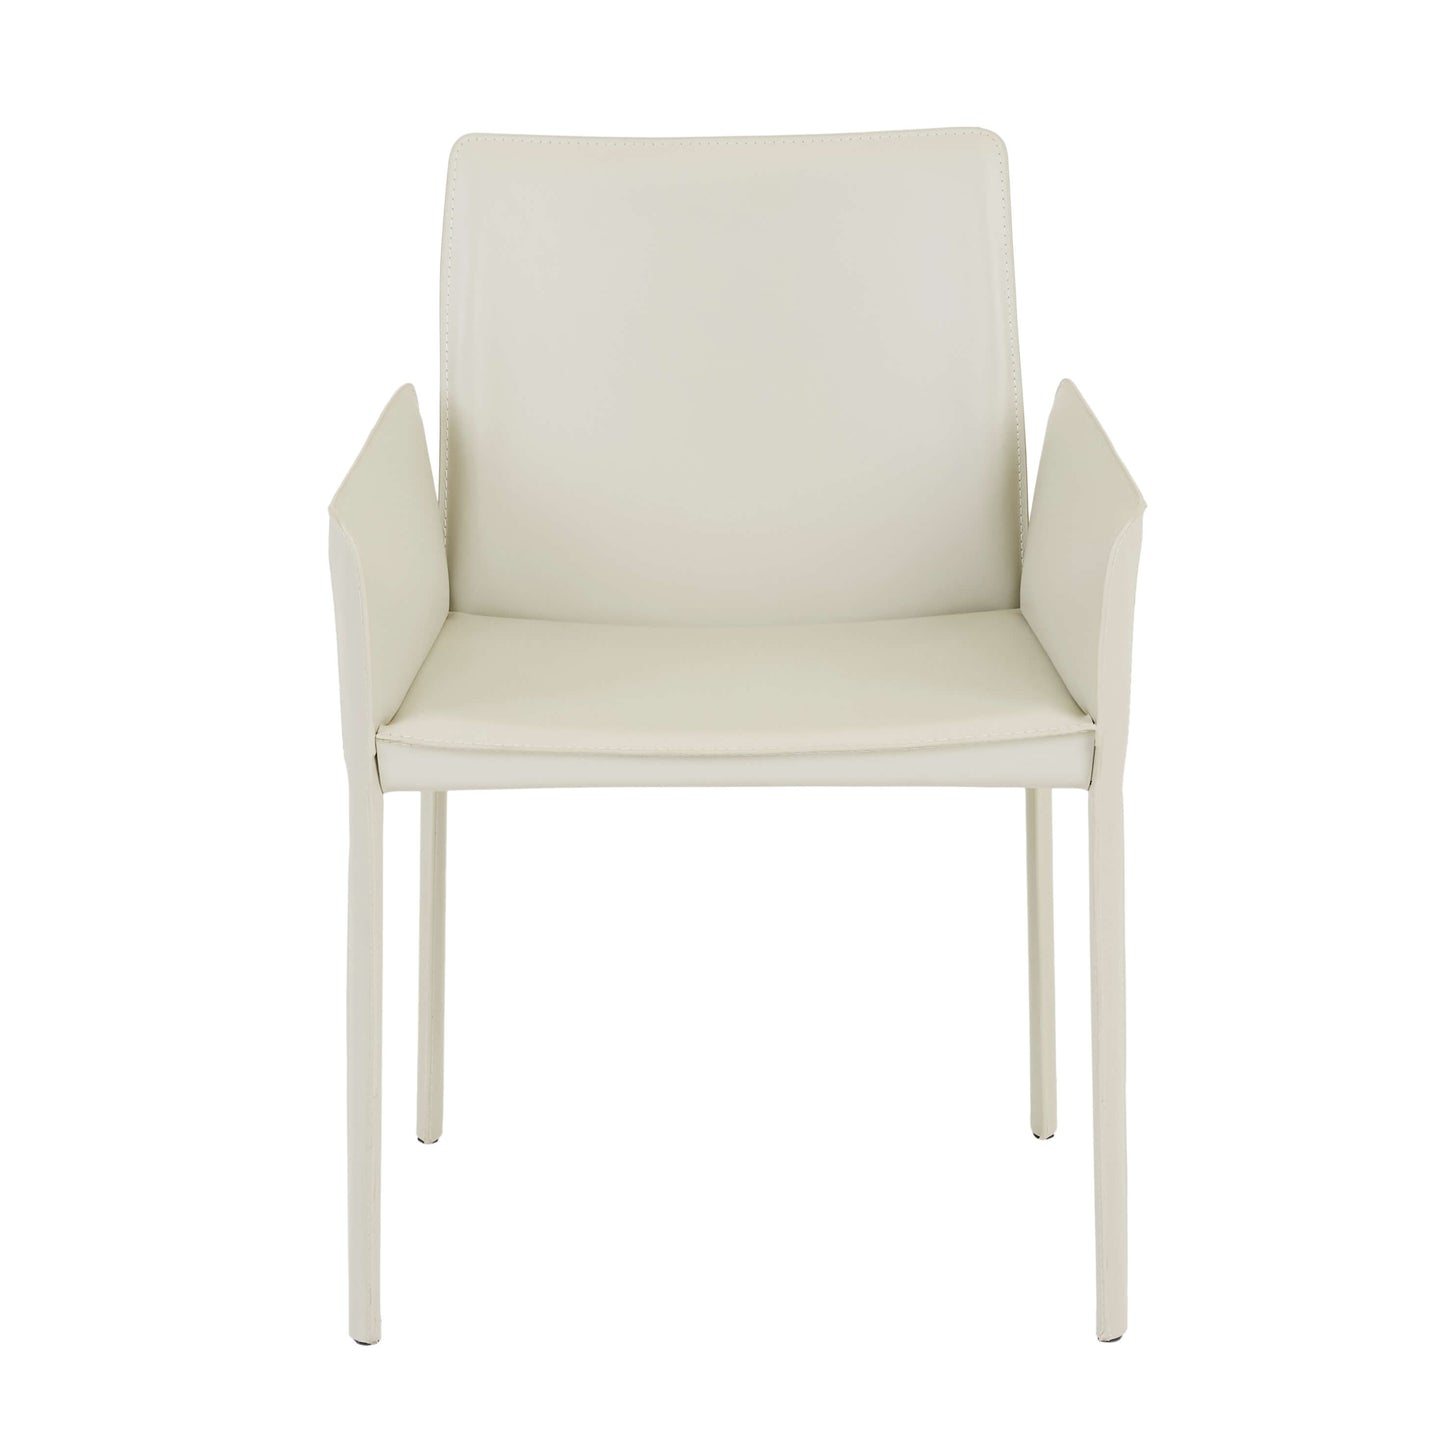 Lachlan | Contemporary Recycled Leather Dining Chair With Arms | Linen Grey